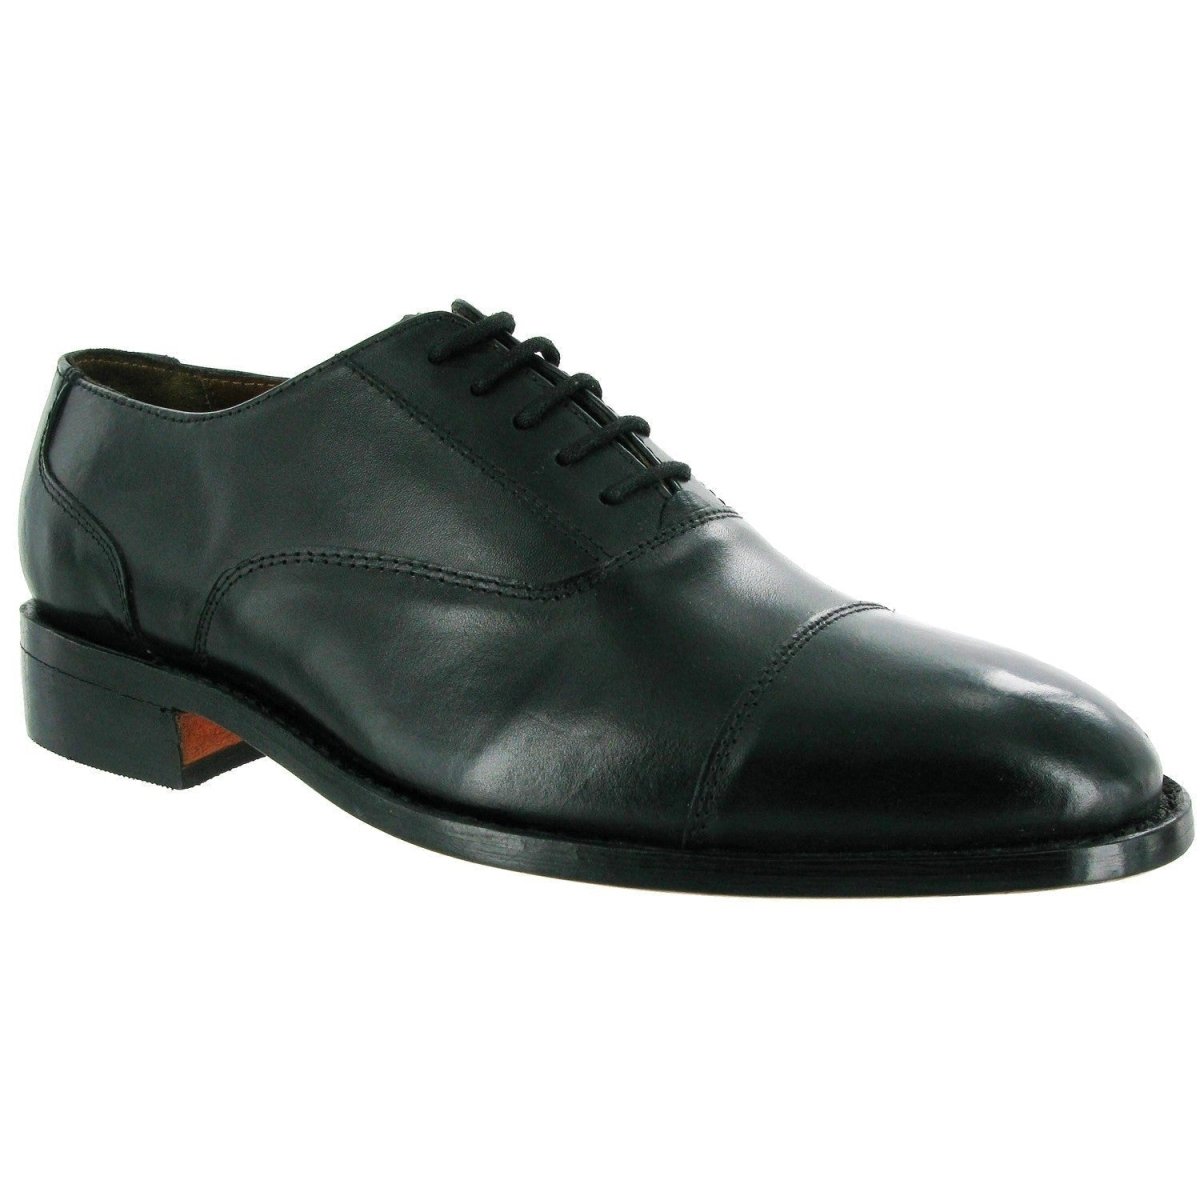 Amblers James Leather Soled Oxford Shoes - Shoe Store Direct